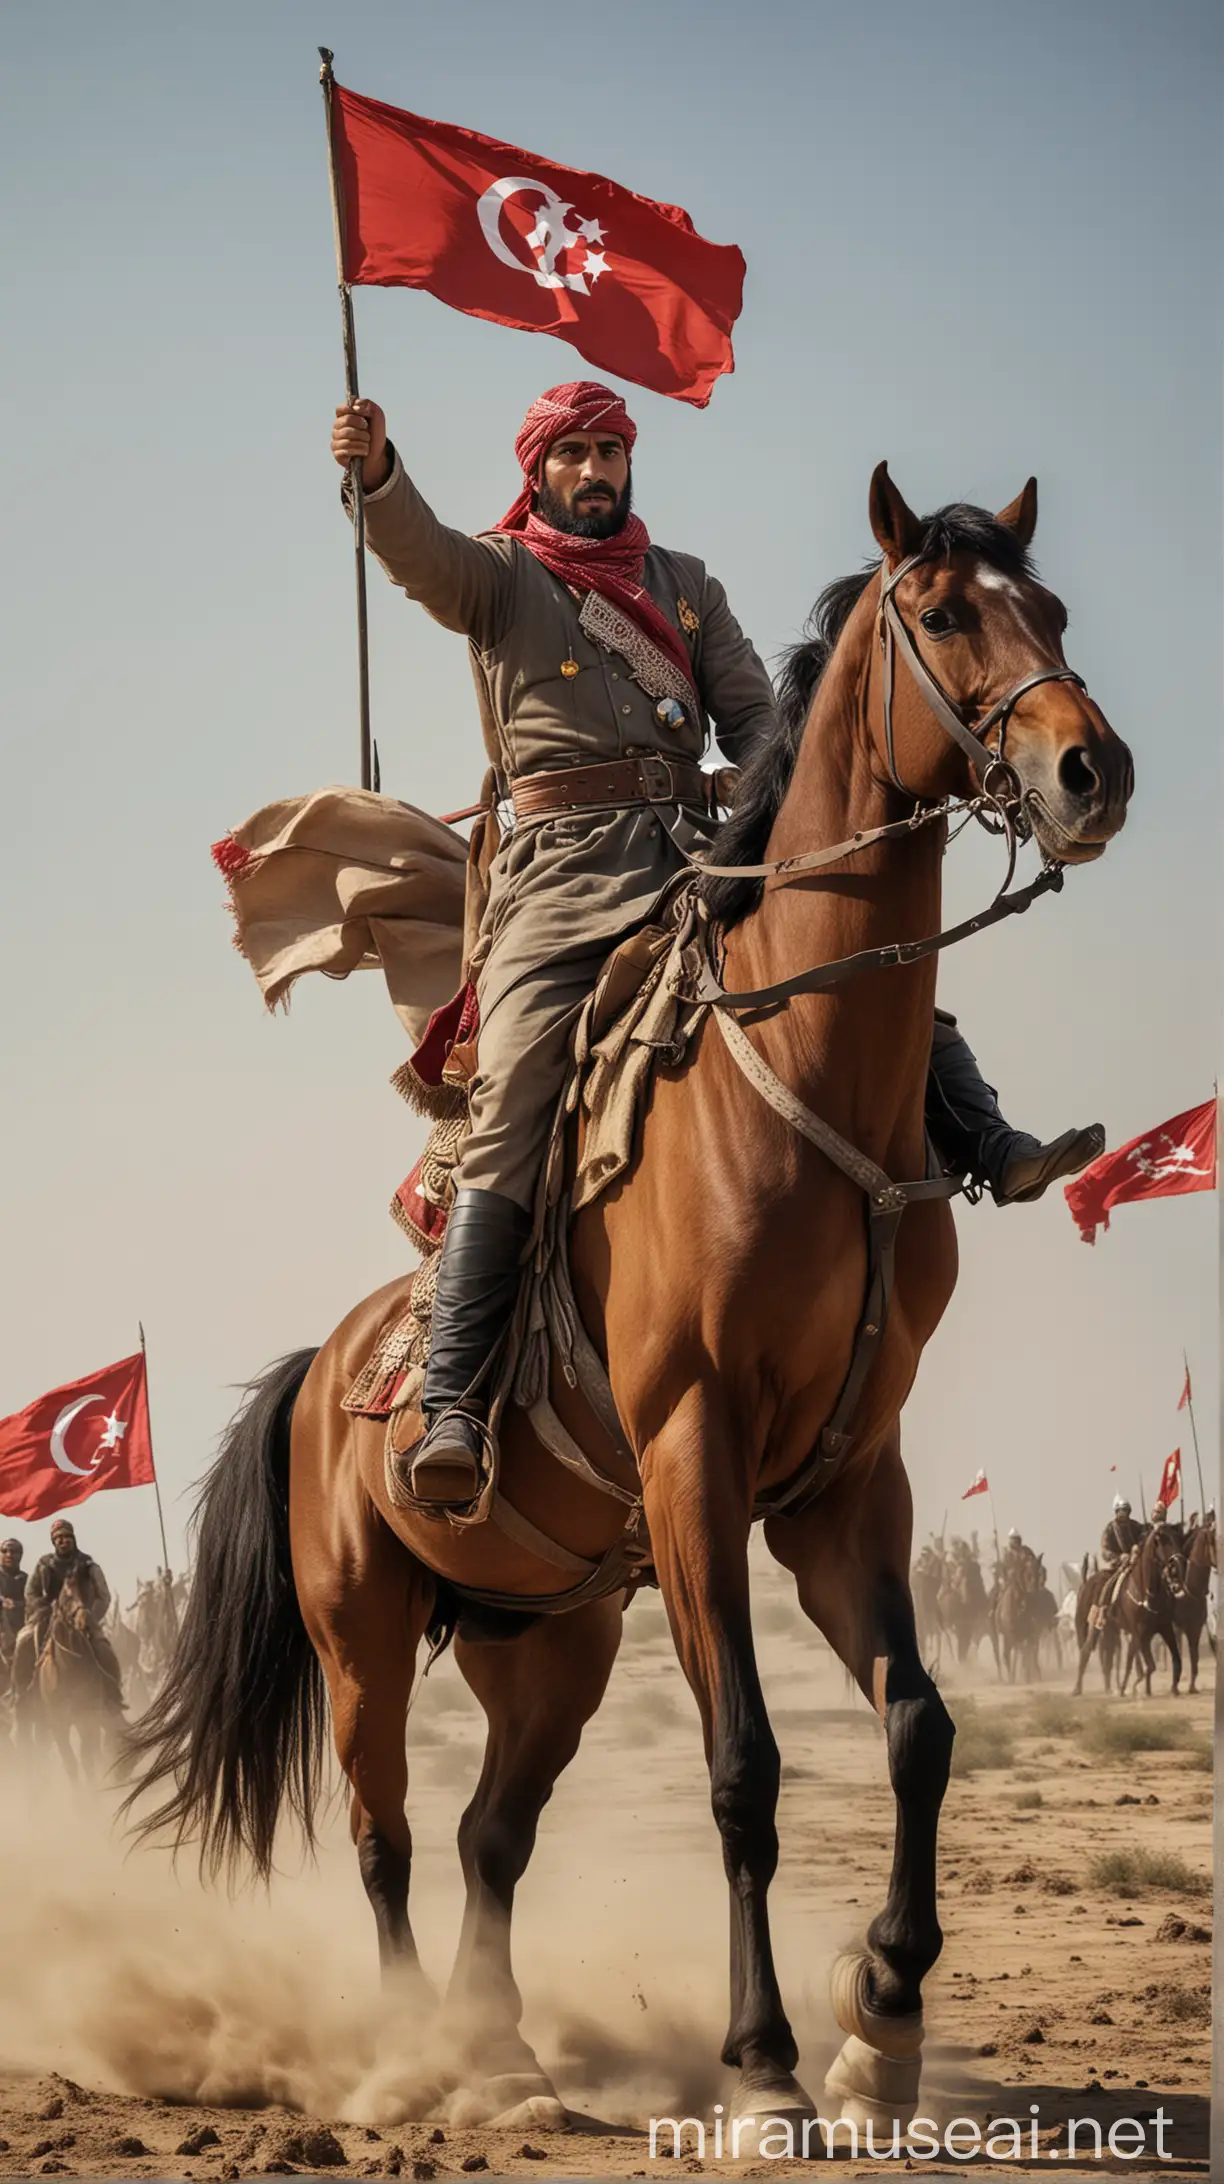 Uzun Hasan, mounted on his horse on the battlefield, with the flag of Akkoyunlu waving behind him, bravely fighting against the Ottoman army.
